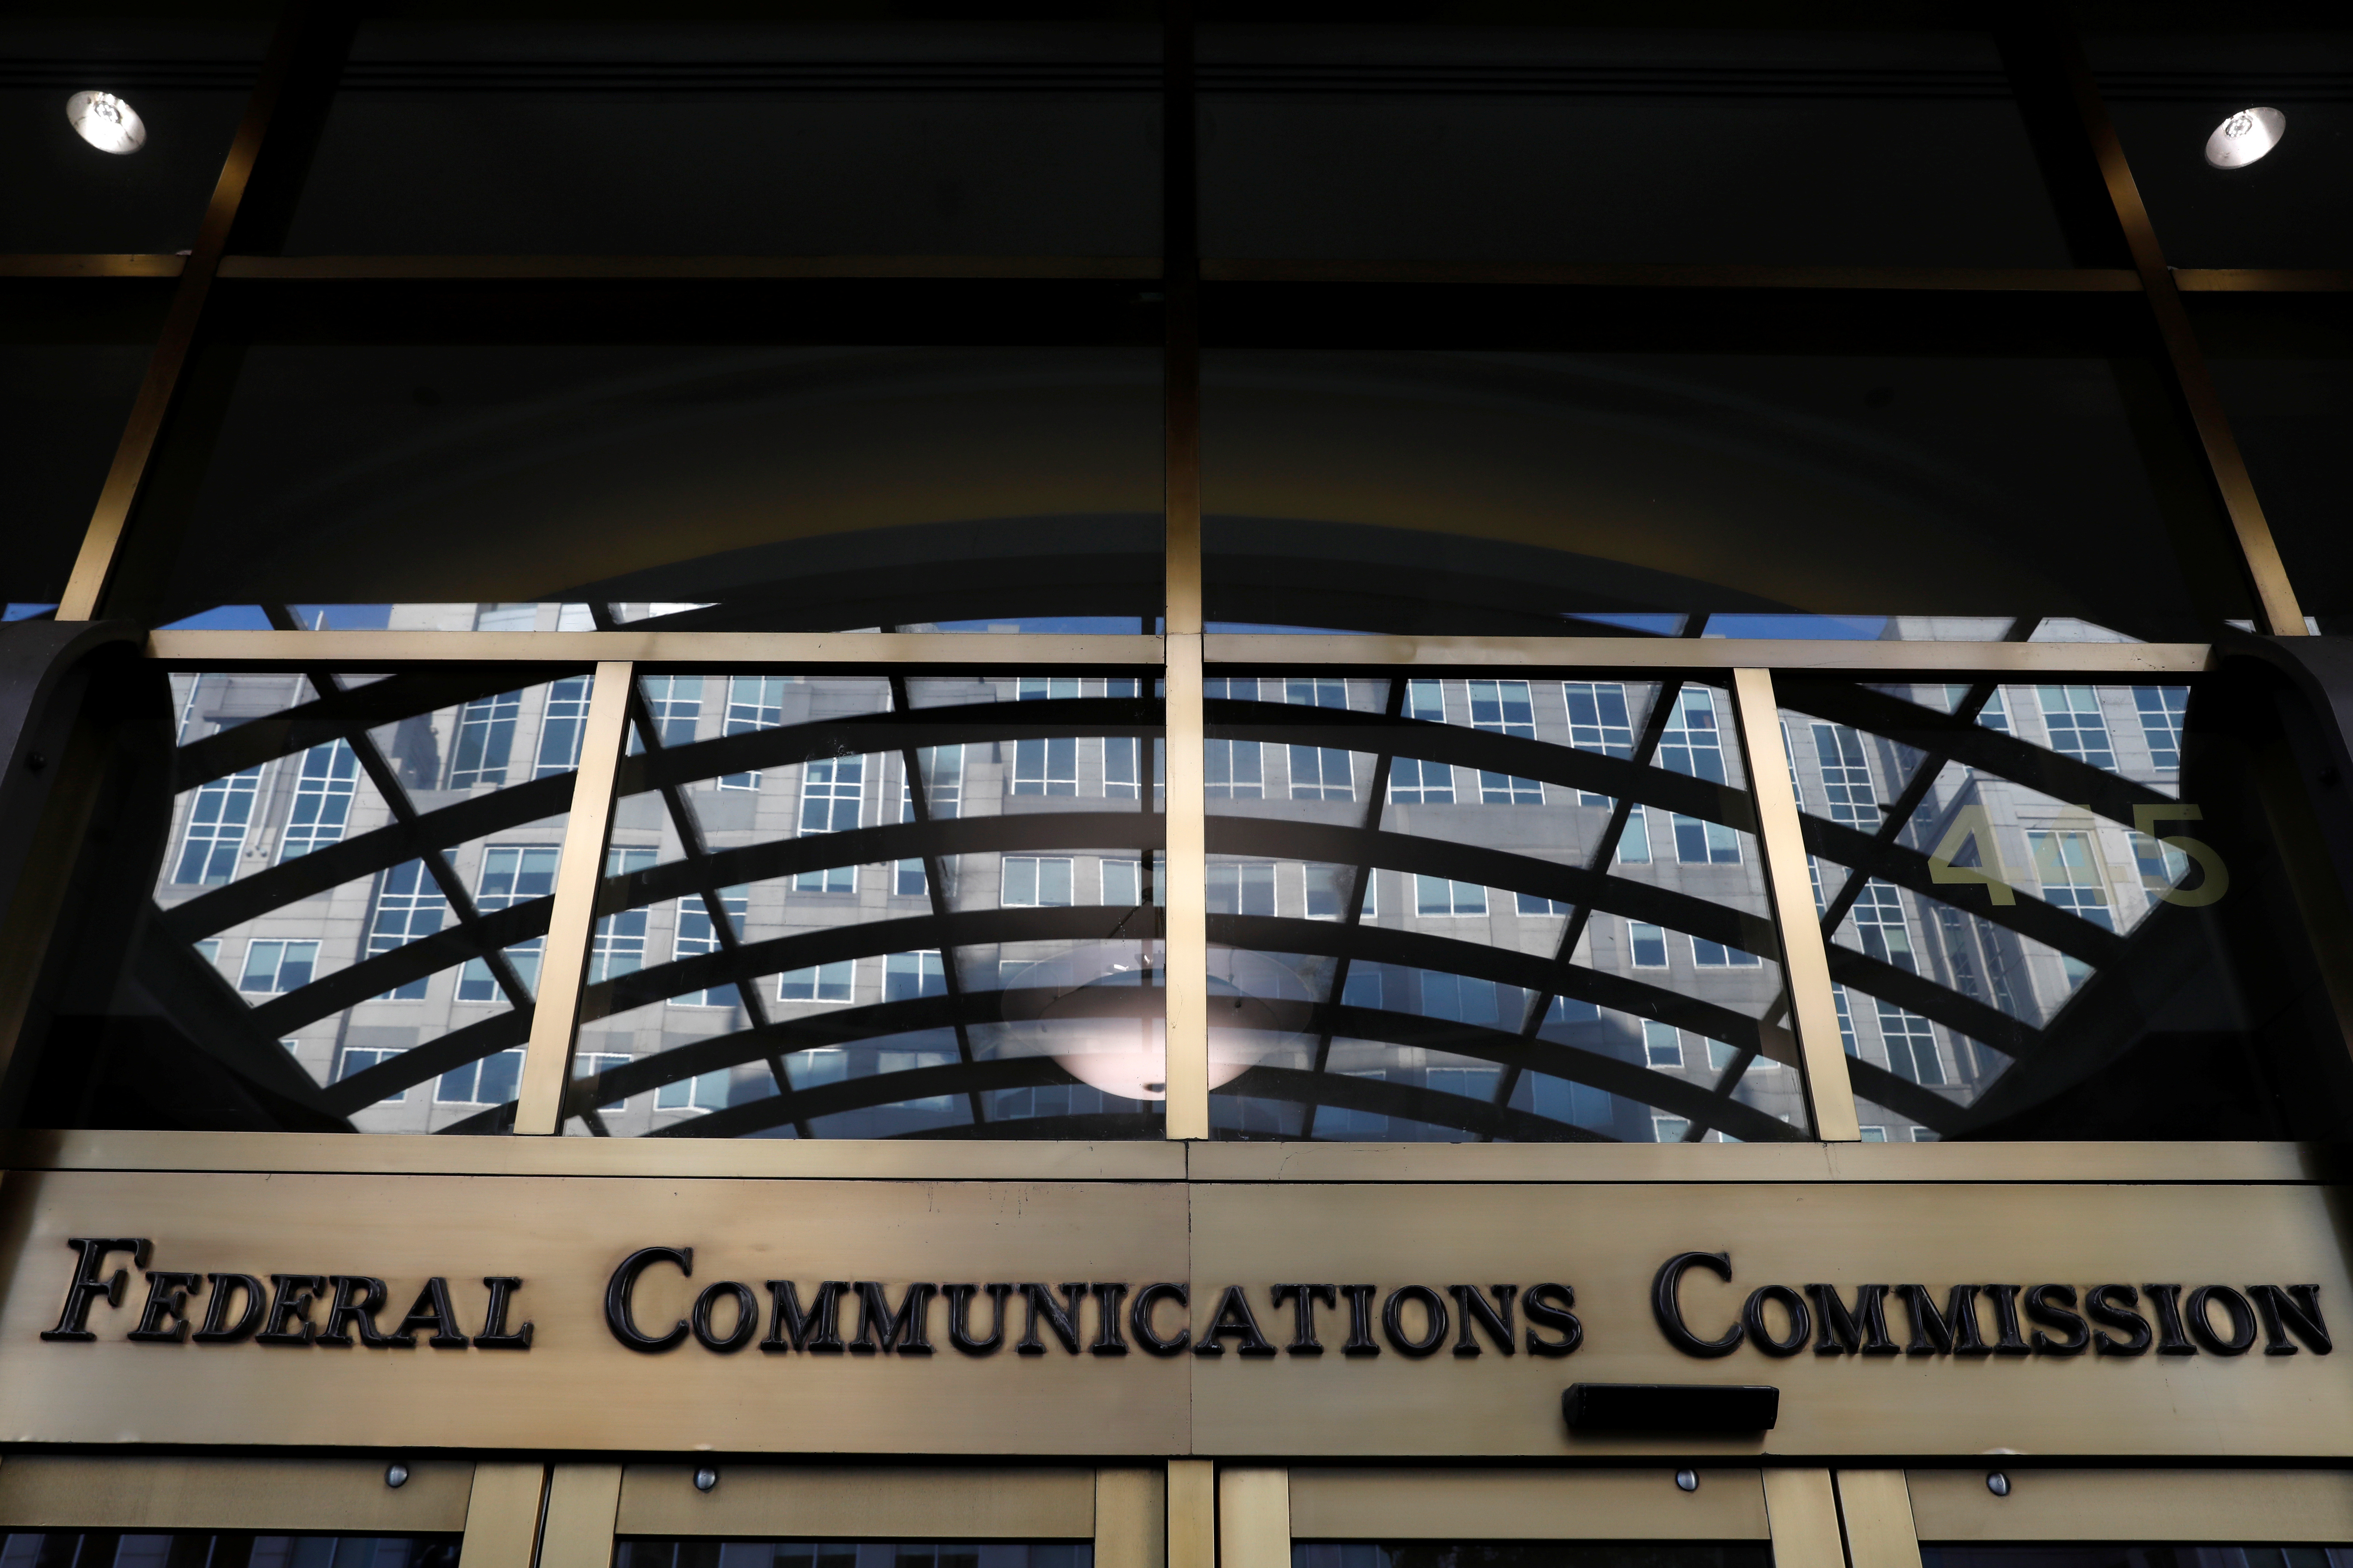 Signage is seen at the headquarters of the Federal Communications Commission in Washington, D.C., U.S., August 29, 2020. REUTERS/Andrew Kelly